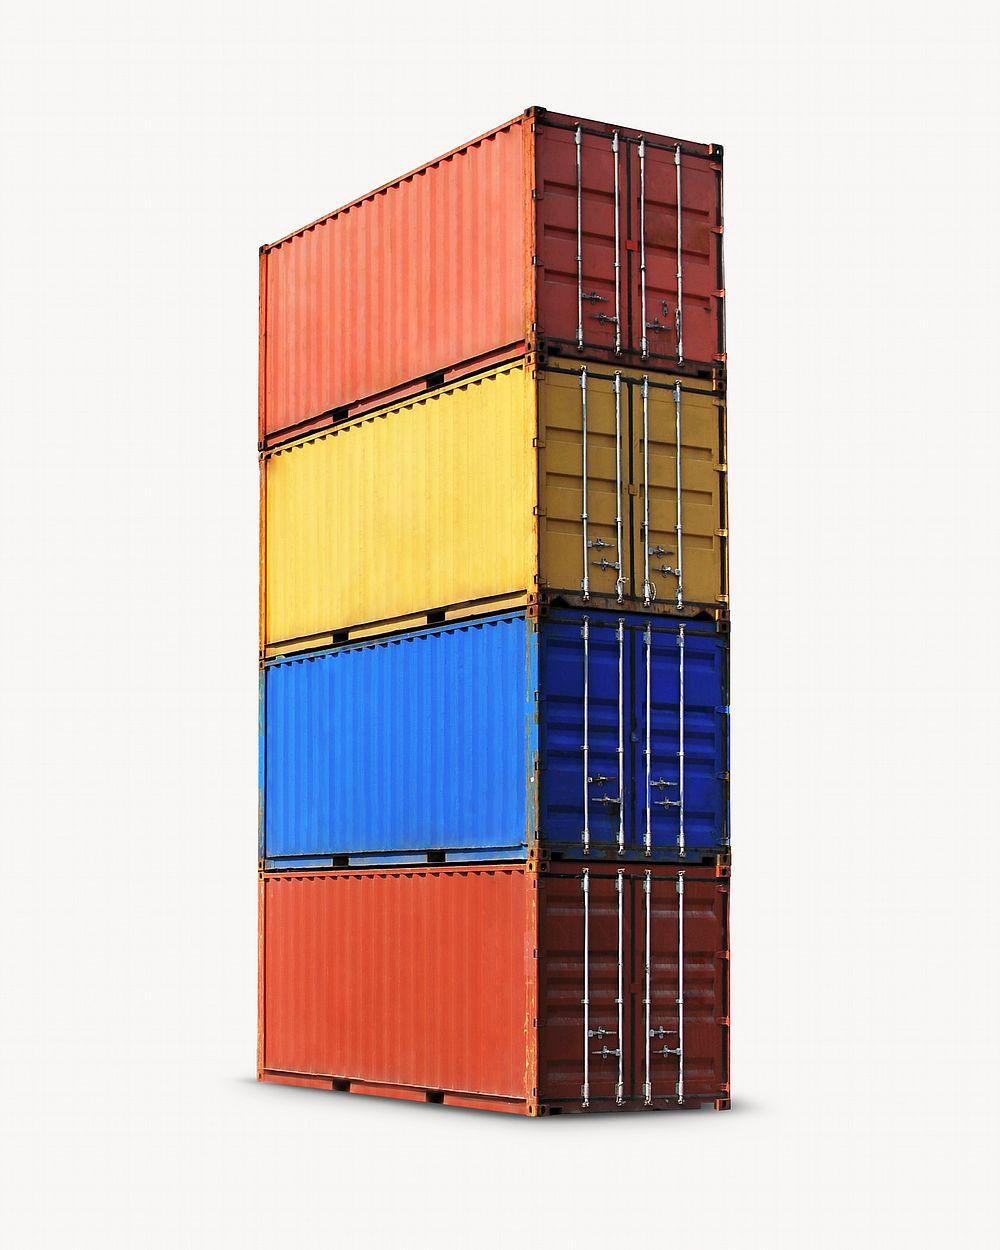 Stacked shipping container, off white design